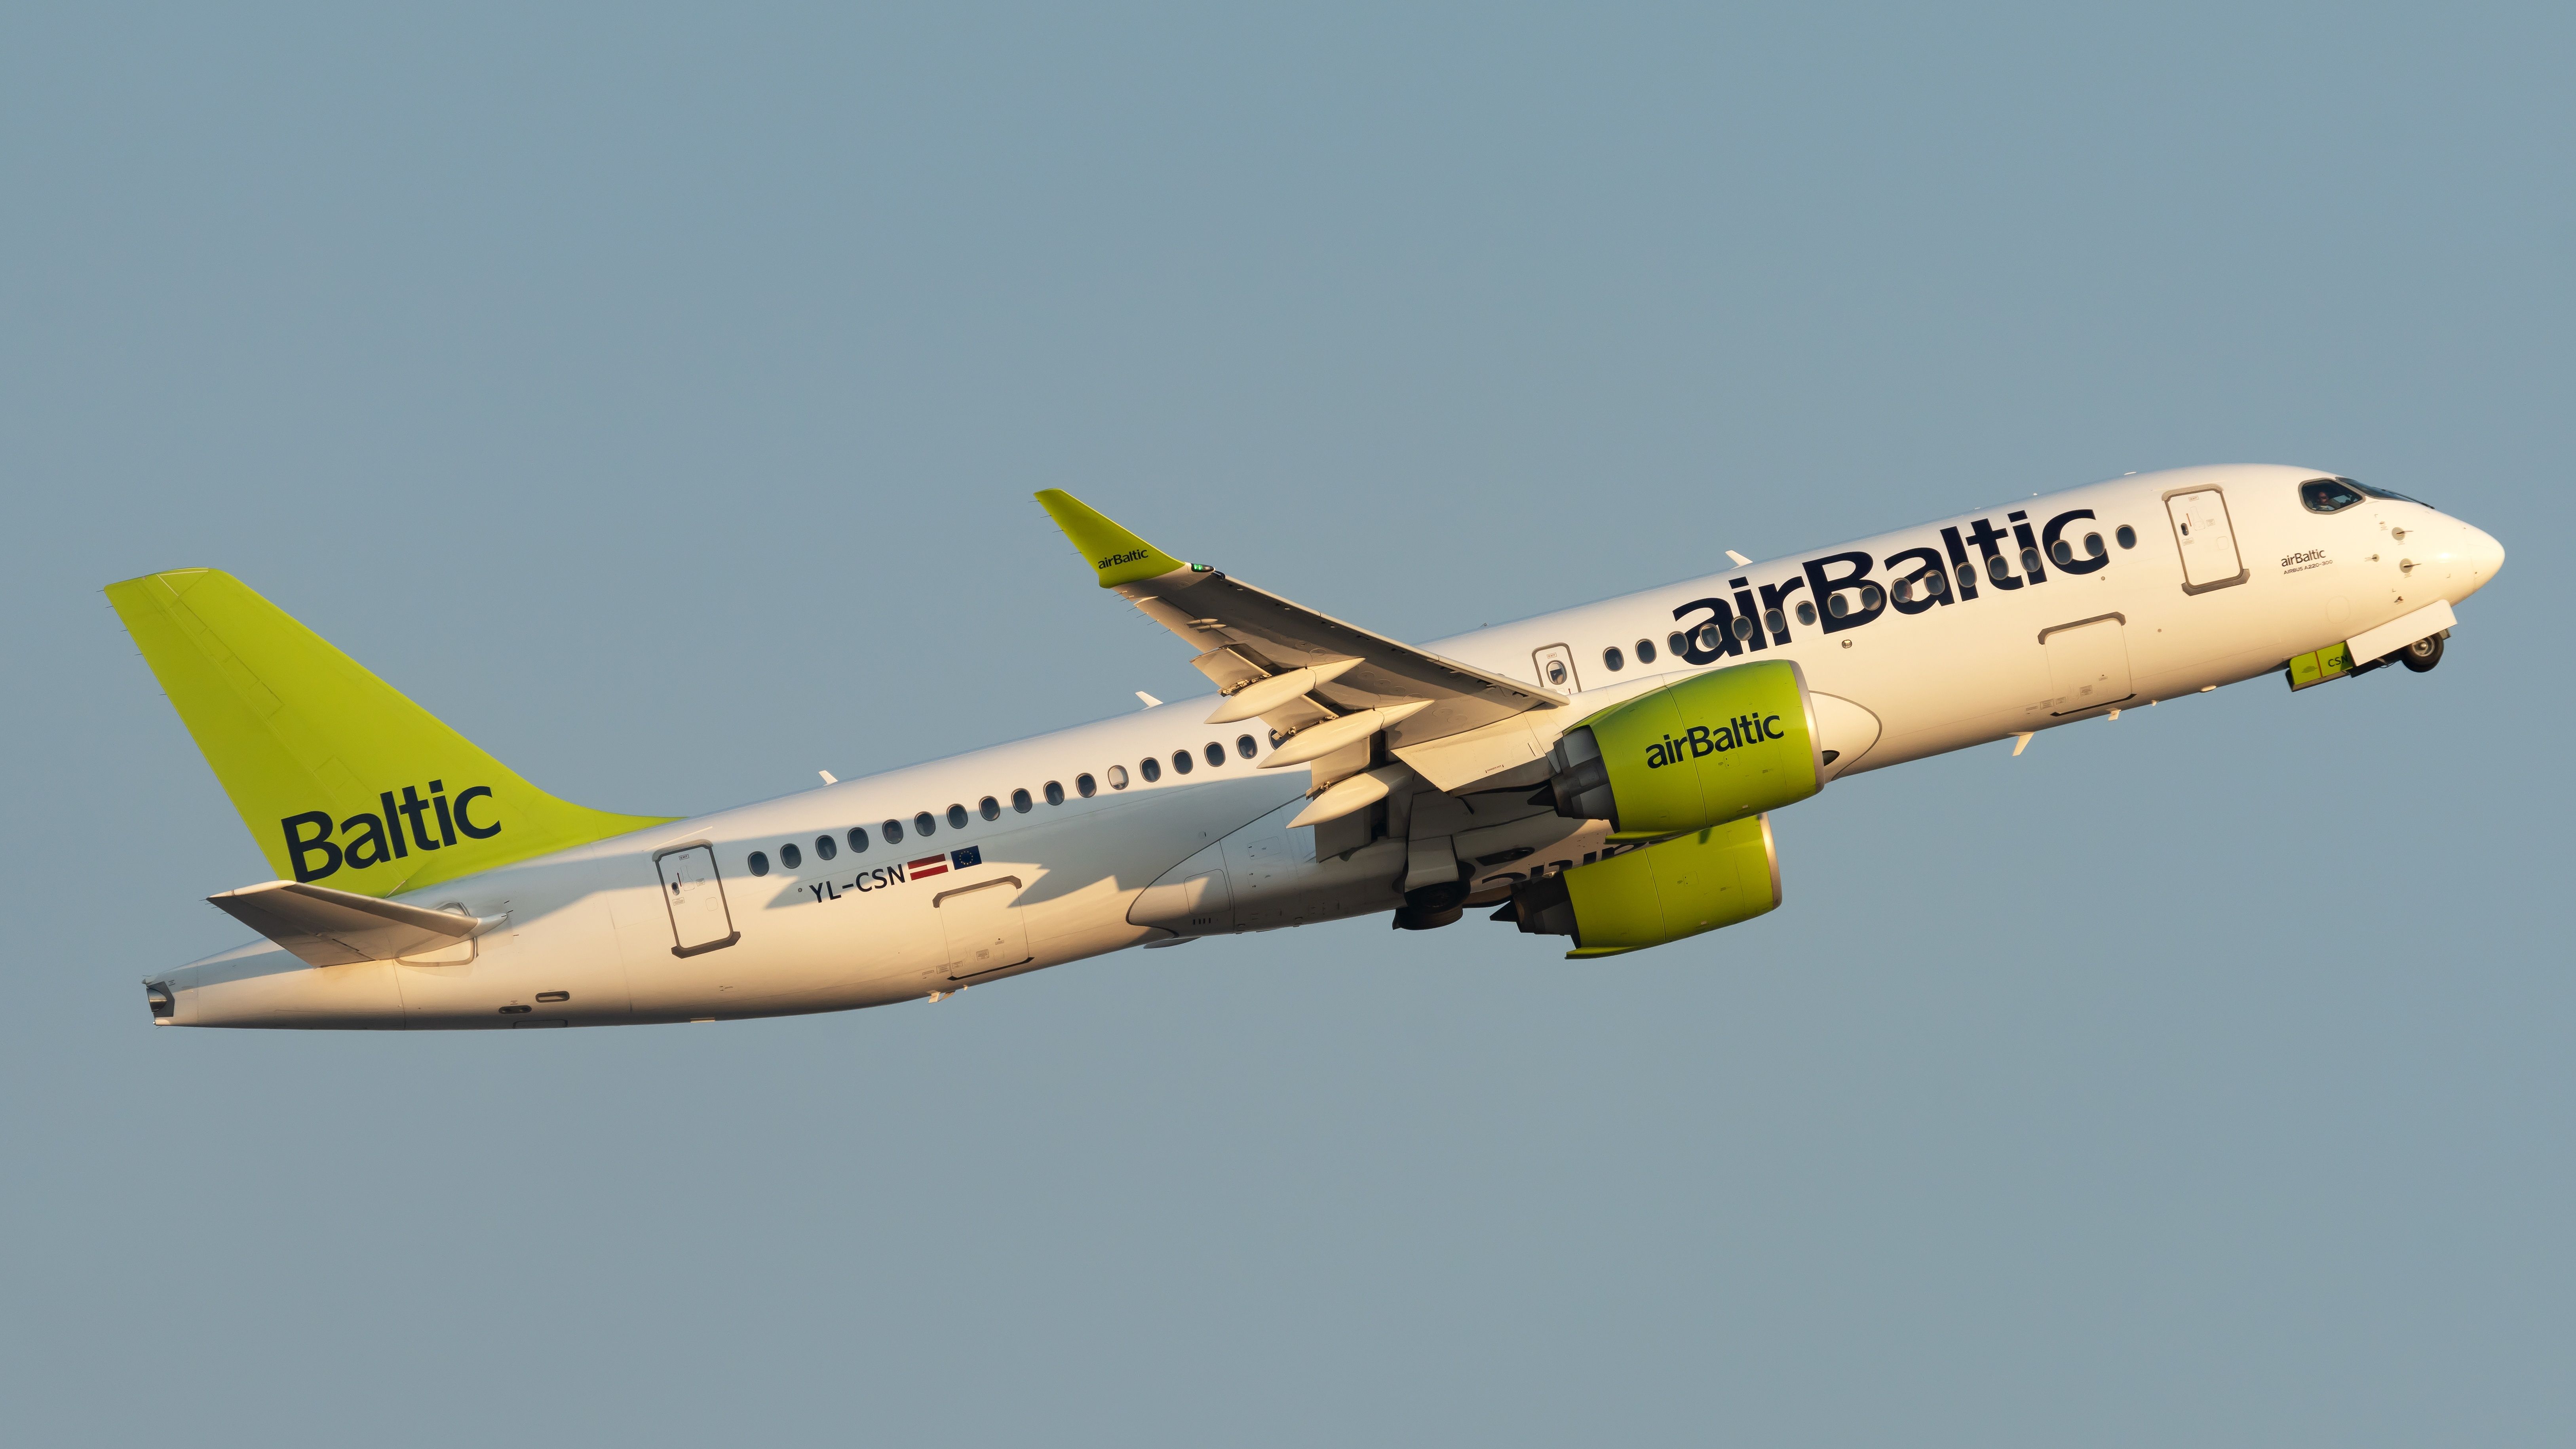 airBaltic Airbus A220-300 taking off from Rome Fiumicino Airport.